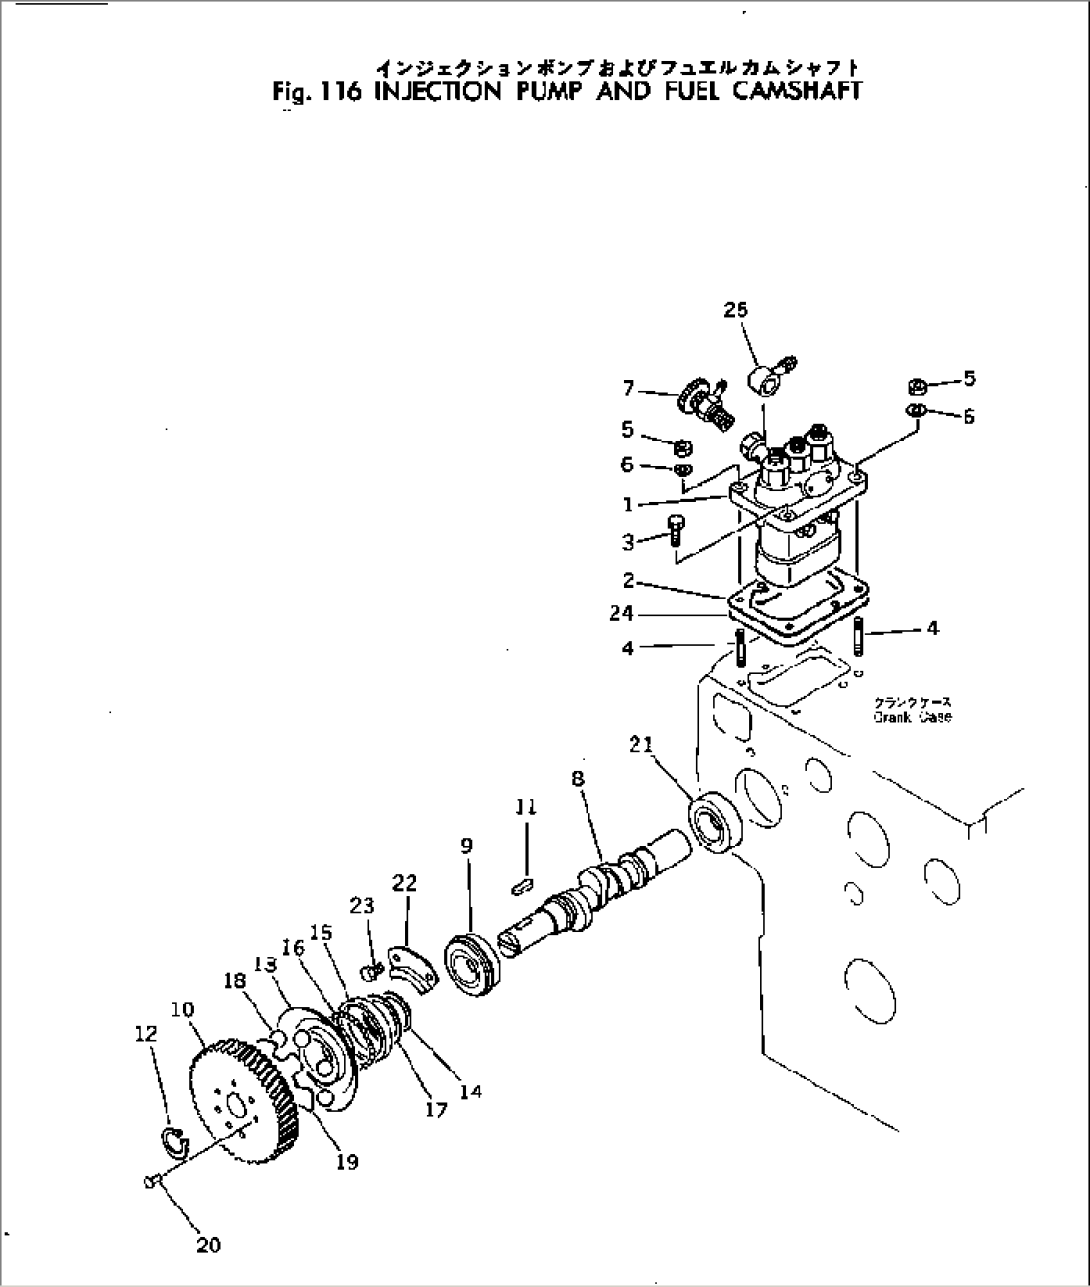 INJECTION PUMP AND FUEL CAMSHAFT